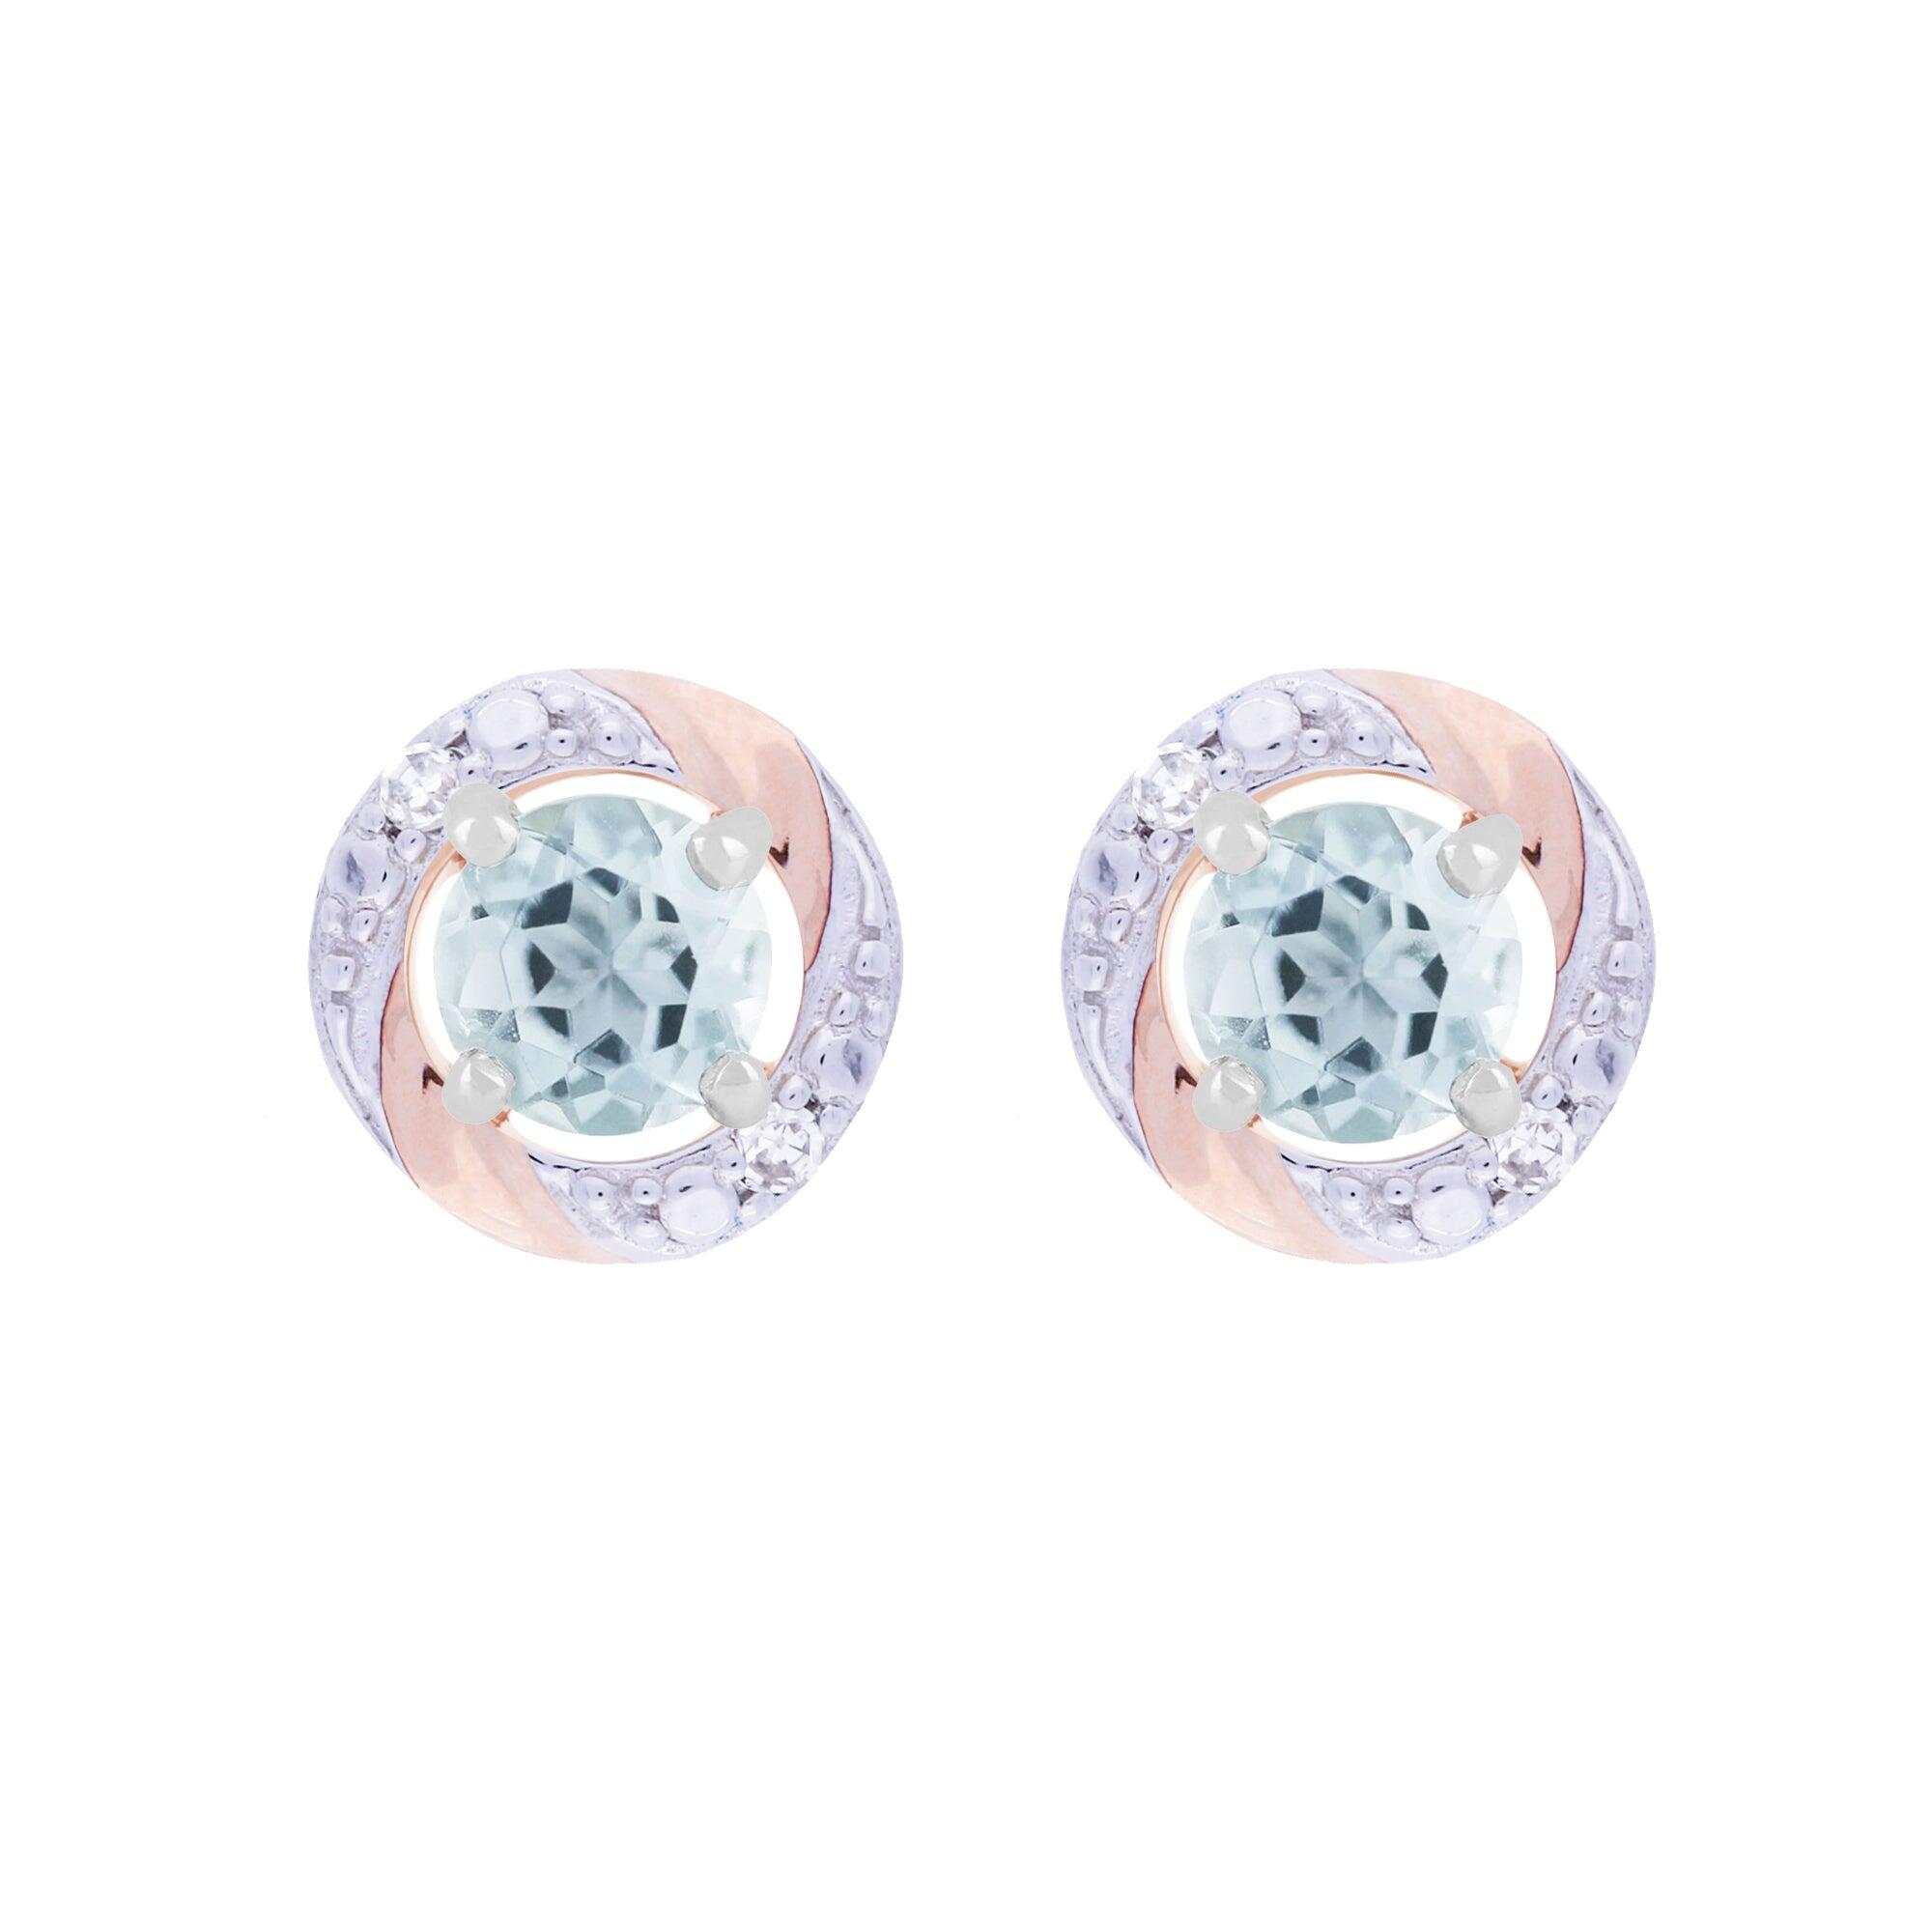 Classic Round Aquamarine Stud Earrings with Detachable Diamond Round Earrings Jacket Set in 9ct White Gold